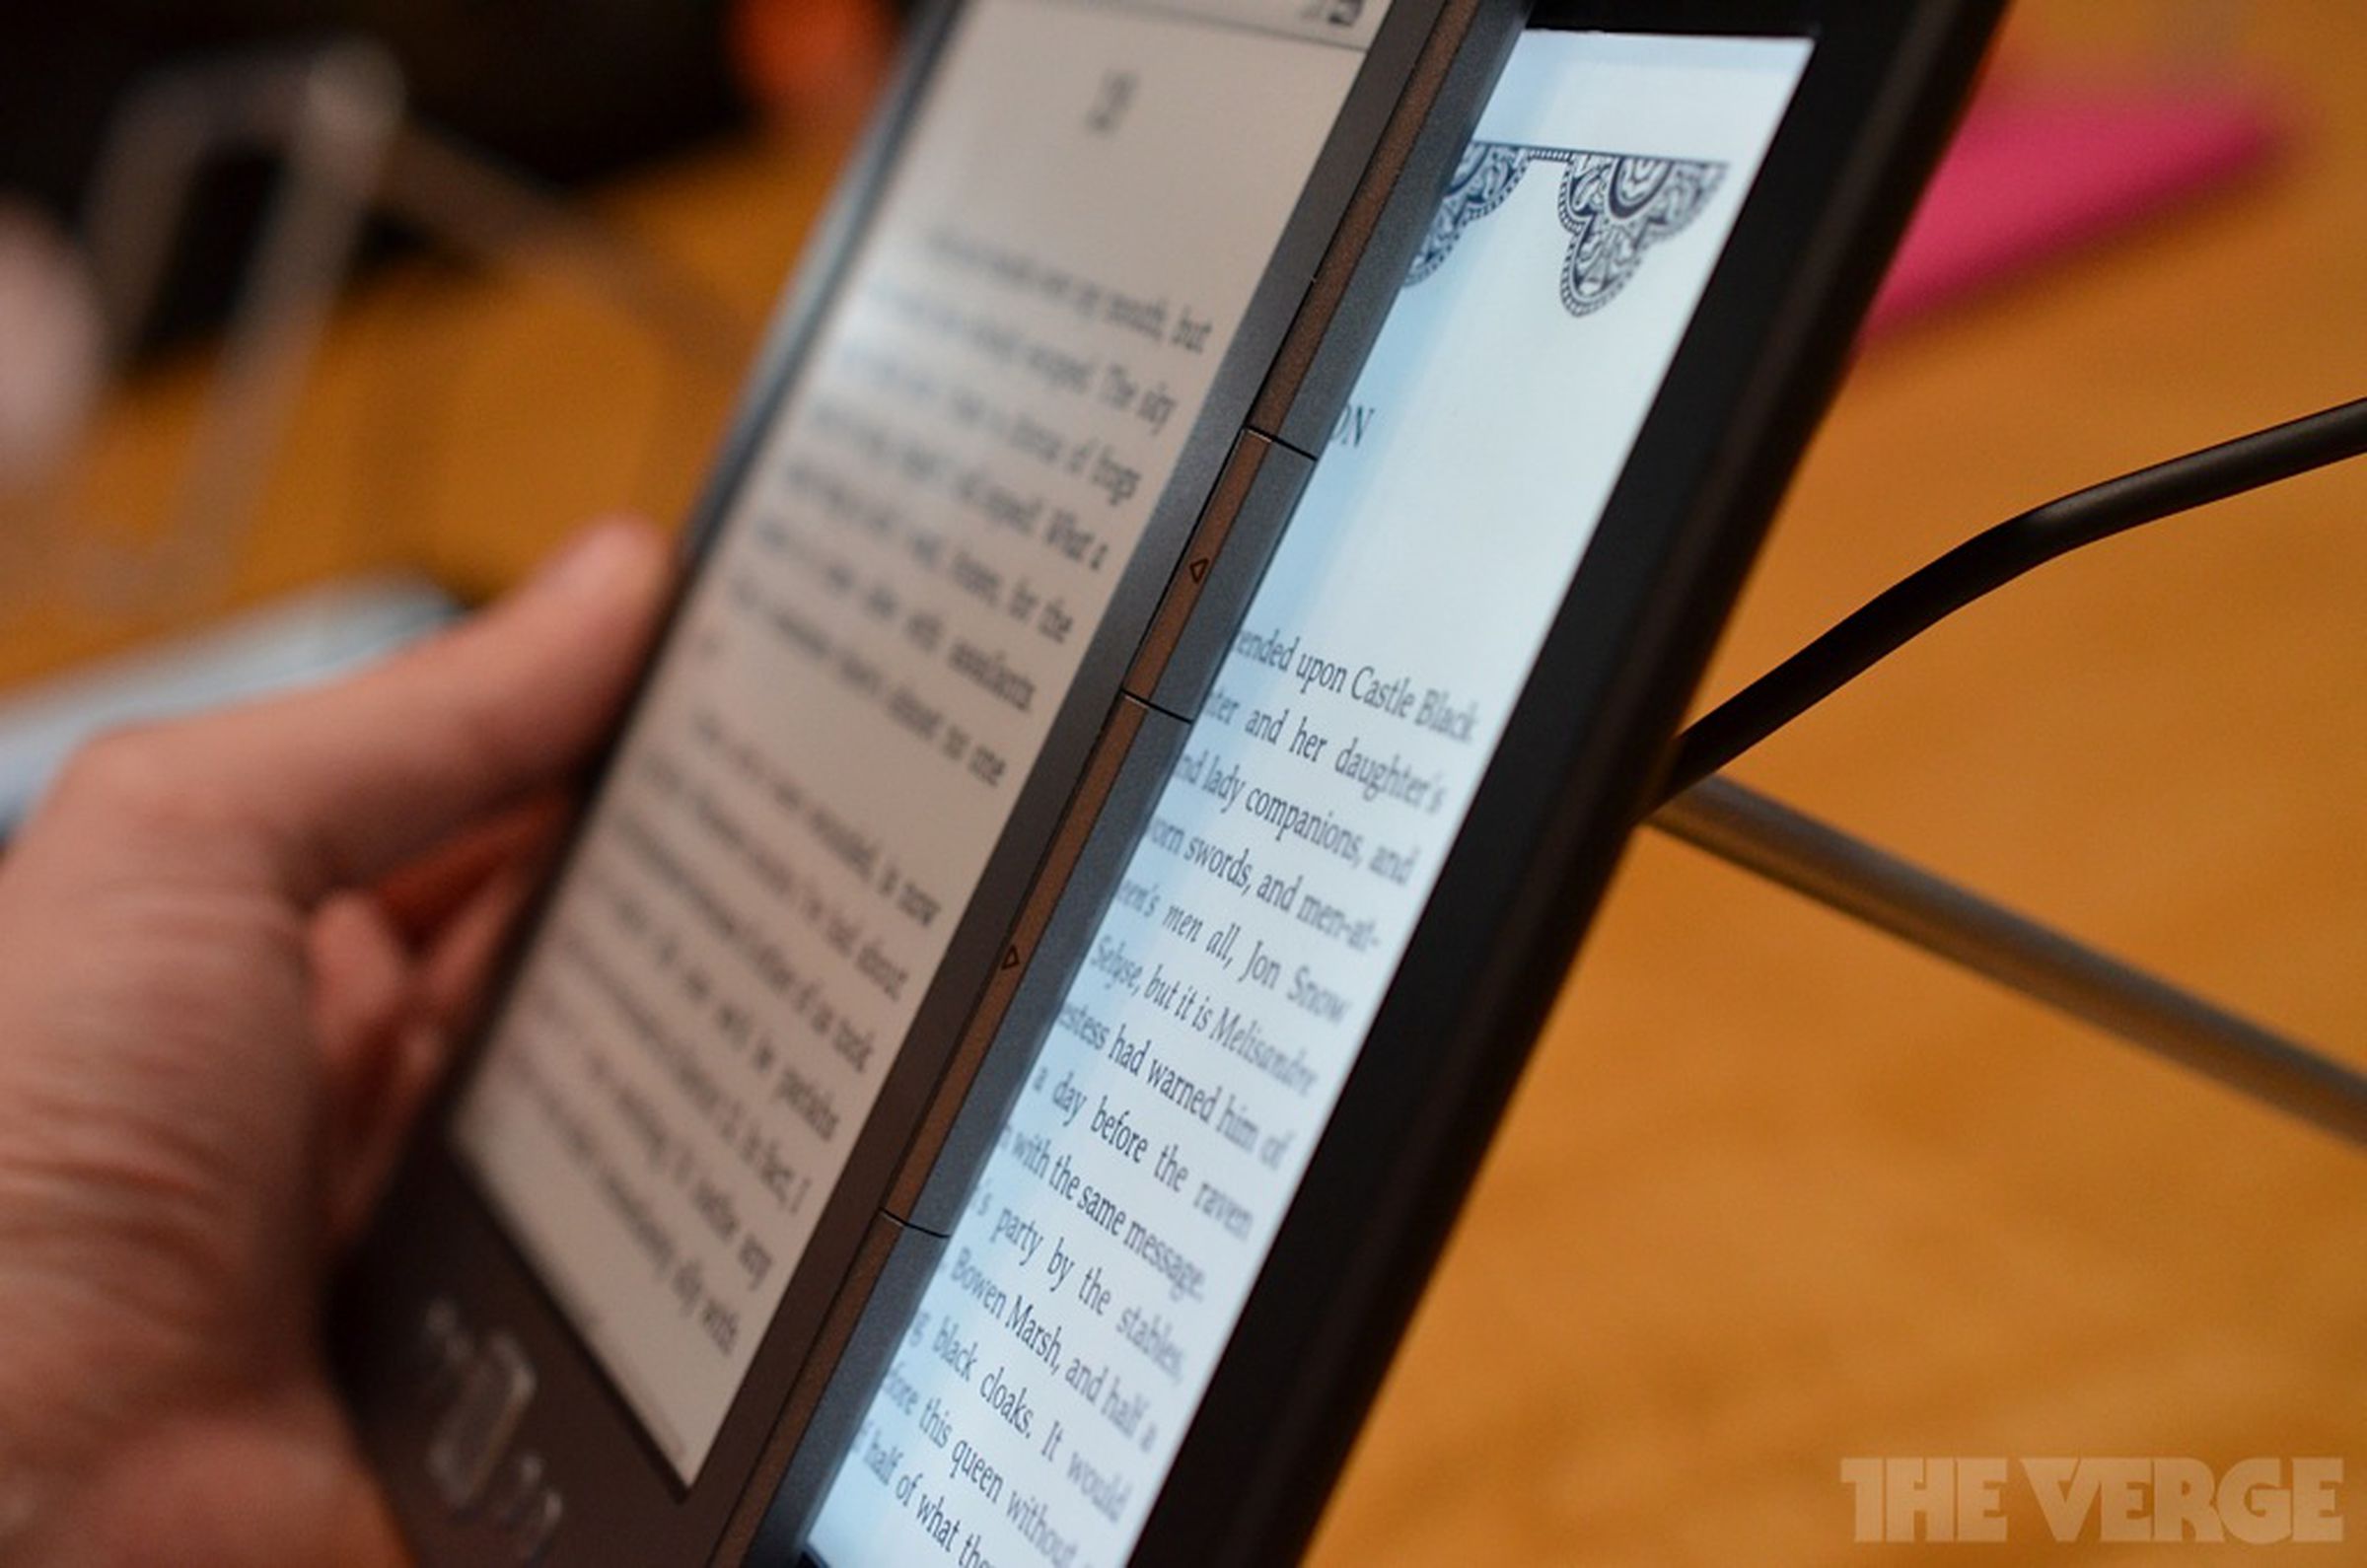 Amazon Kindle paperwhite hands-on pictures